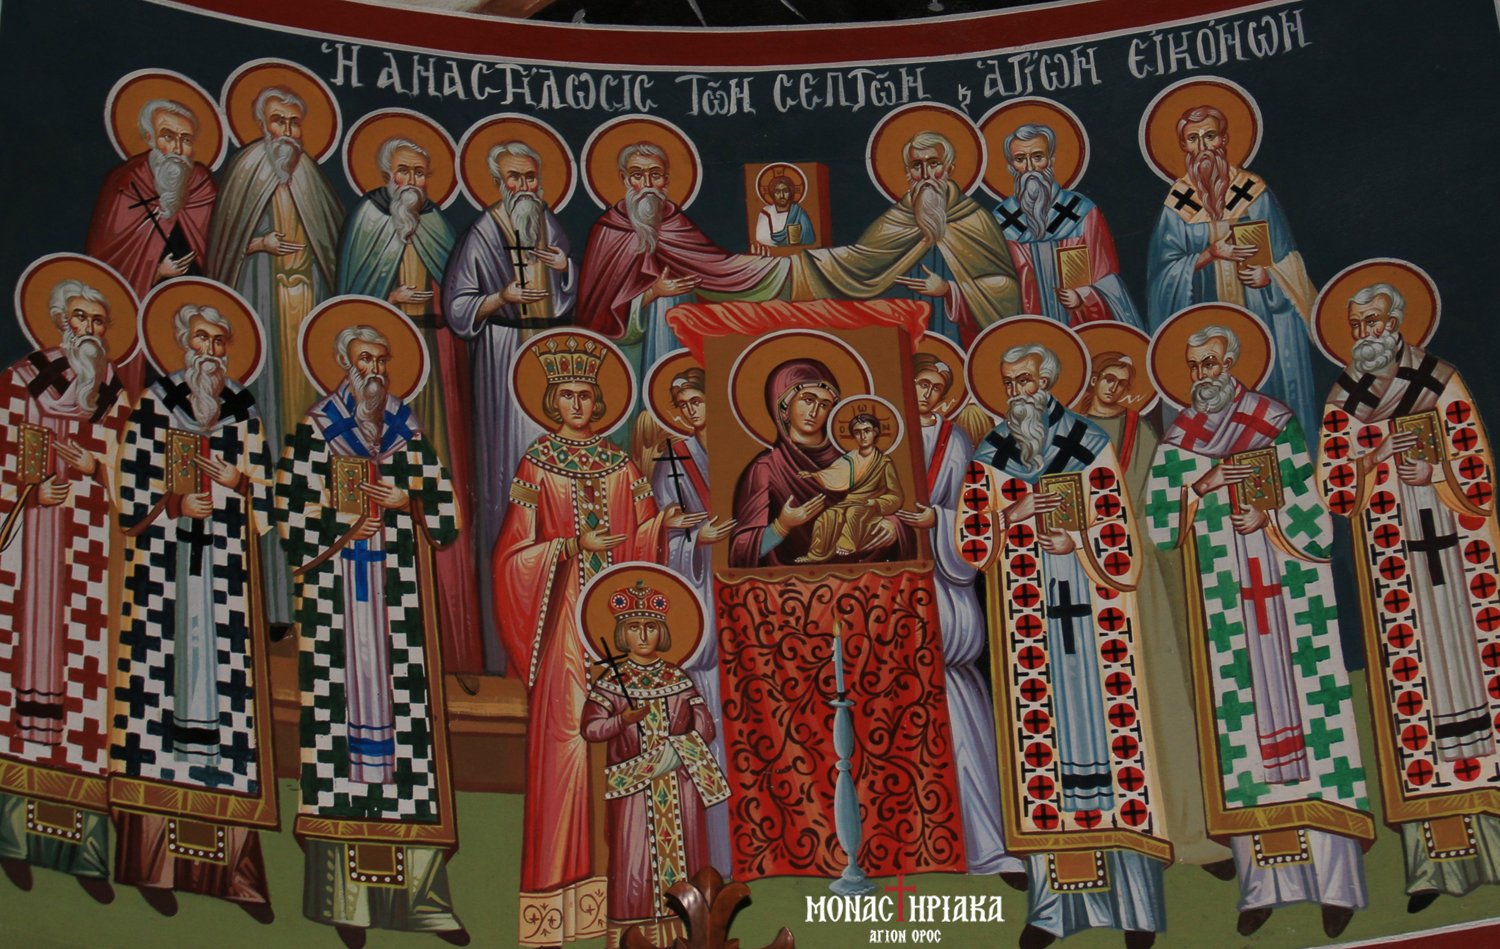 the restoration of icons in Churches